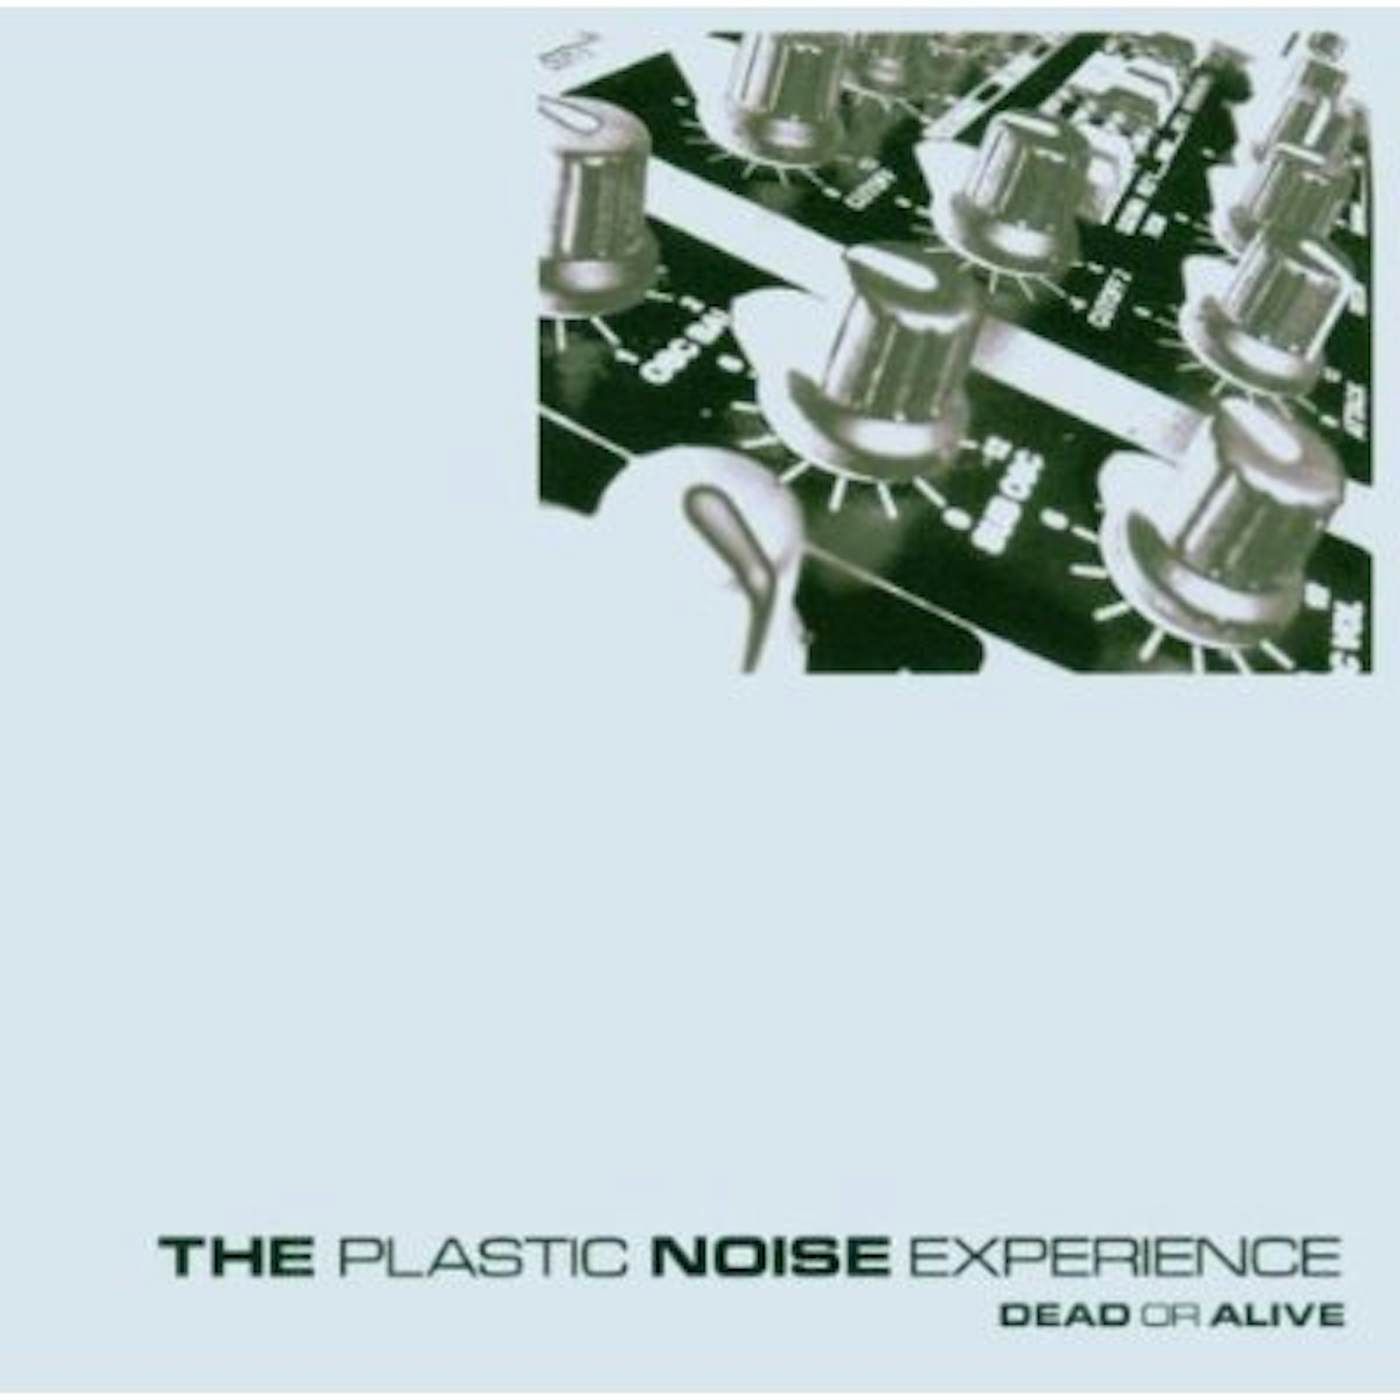 The Plastic Noise Experience DEAD OR ALIVE CD